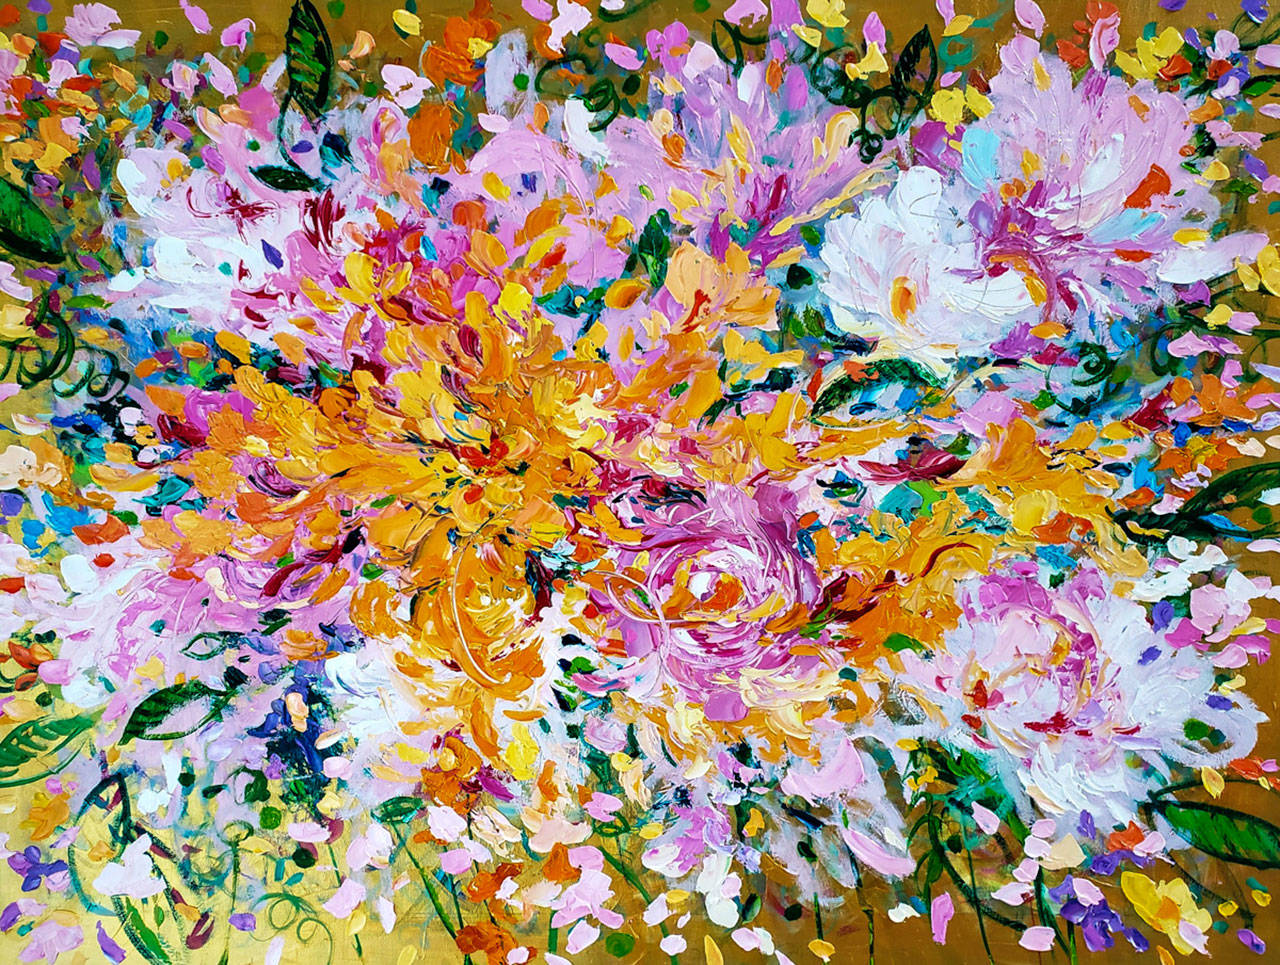 Sudna Hazard’s “Floribunda” series is featured at the Port Townsend Gallery through the month of February.